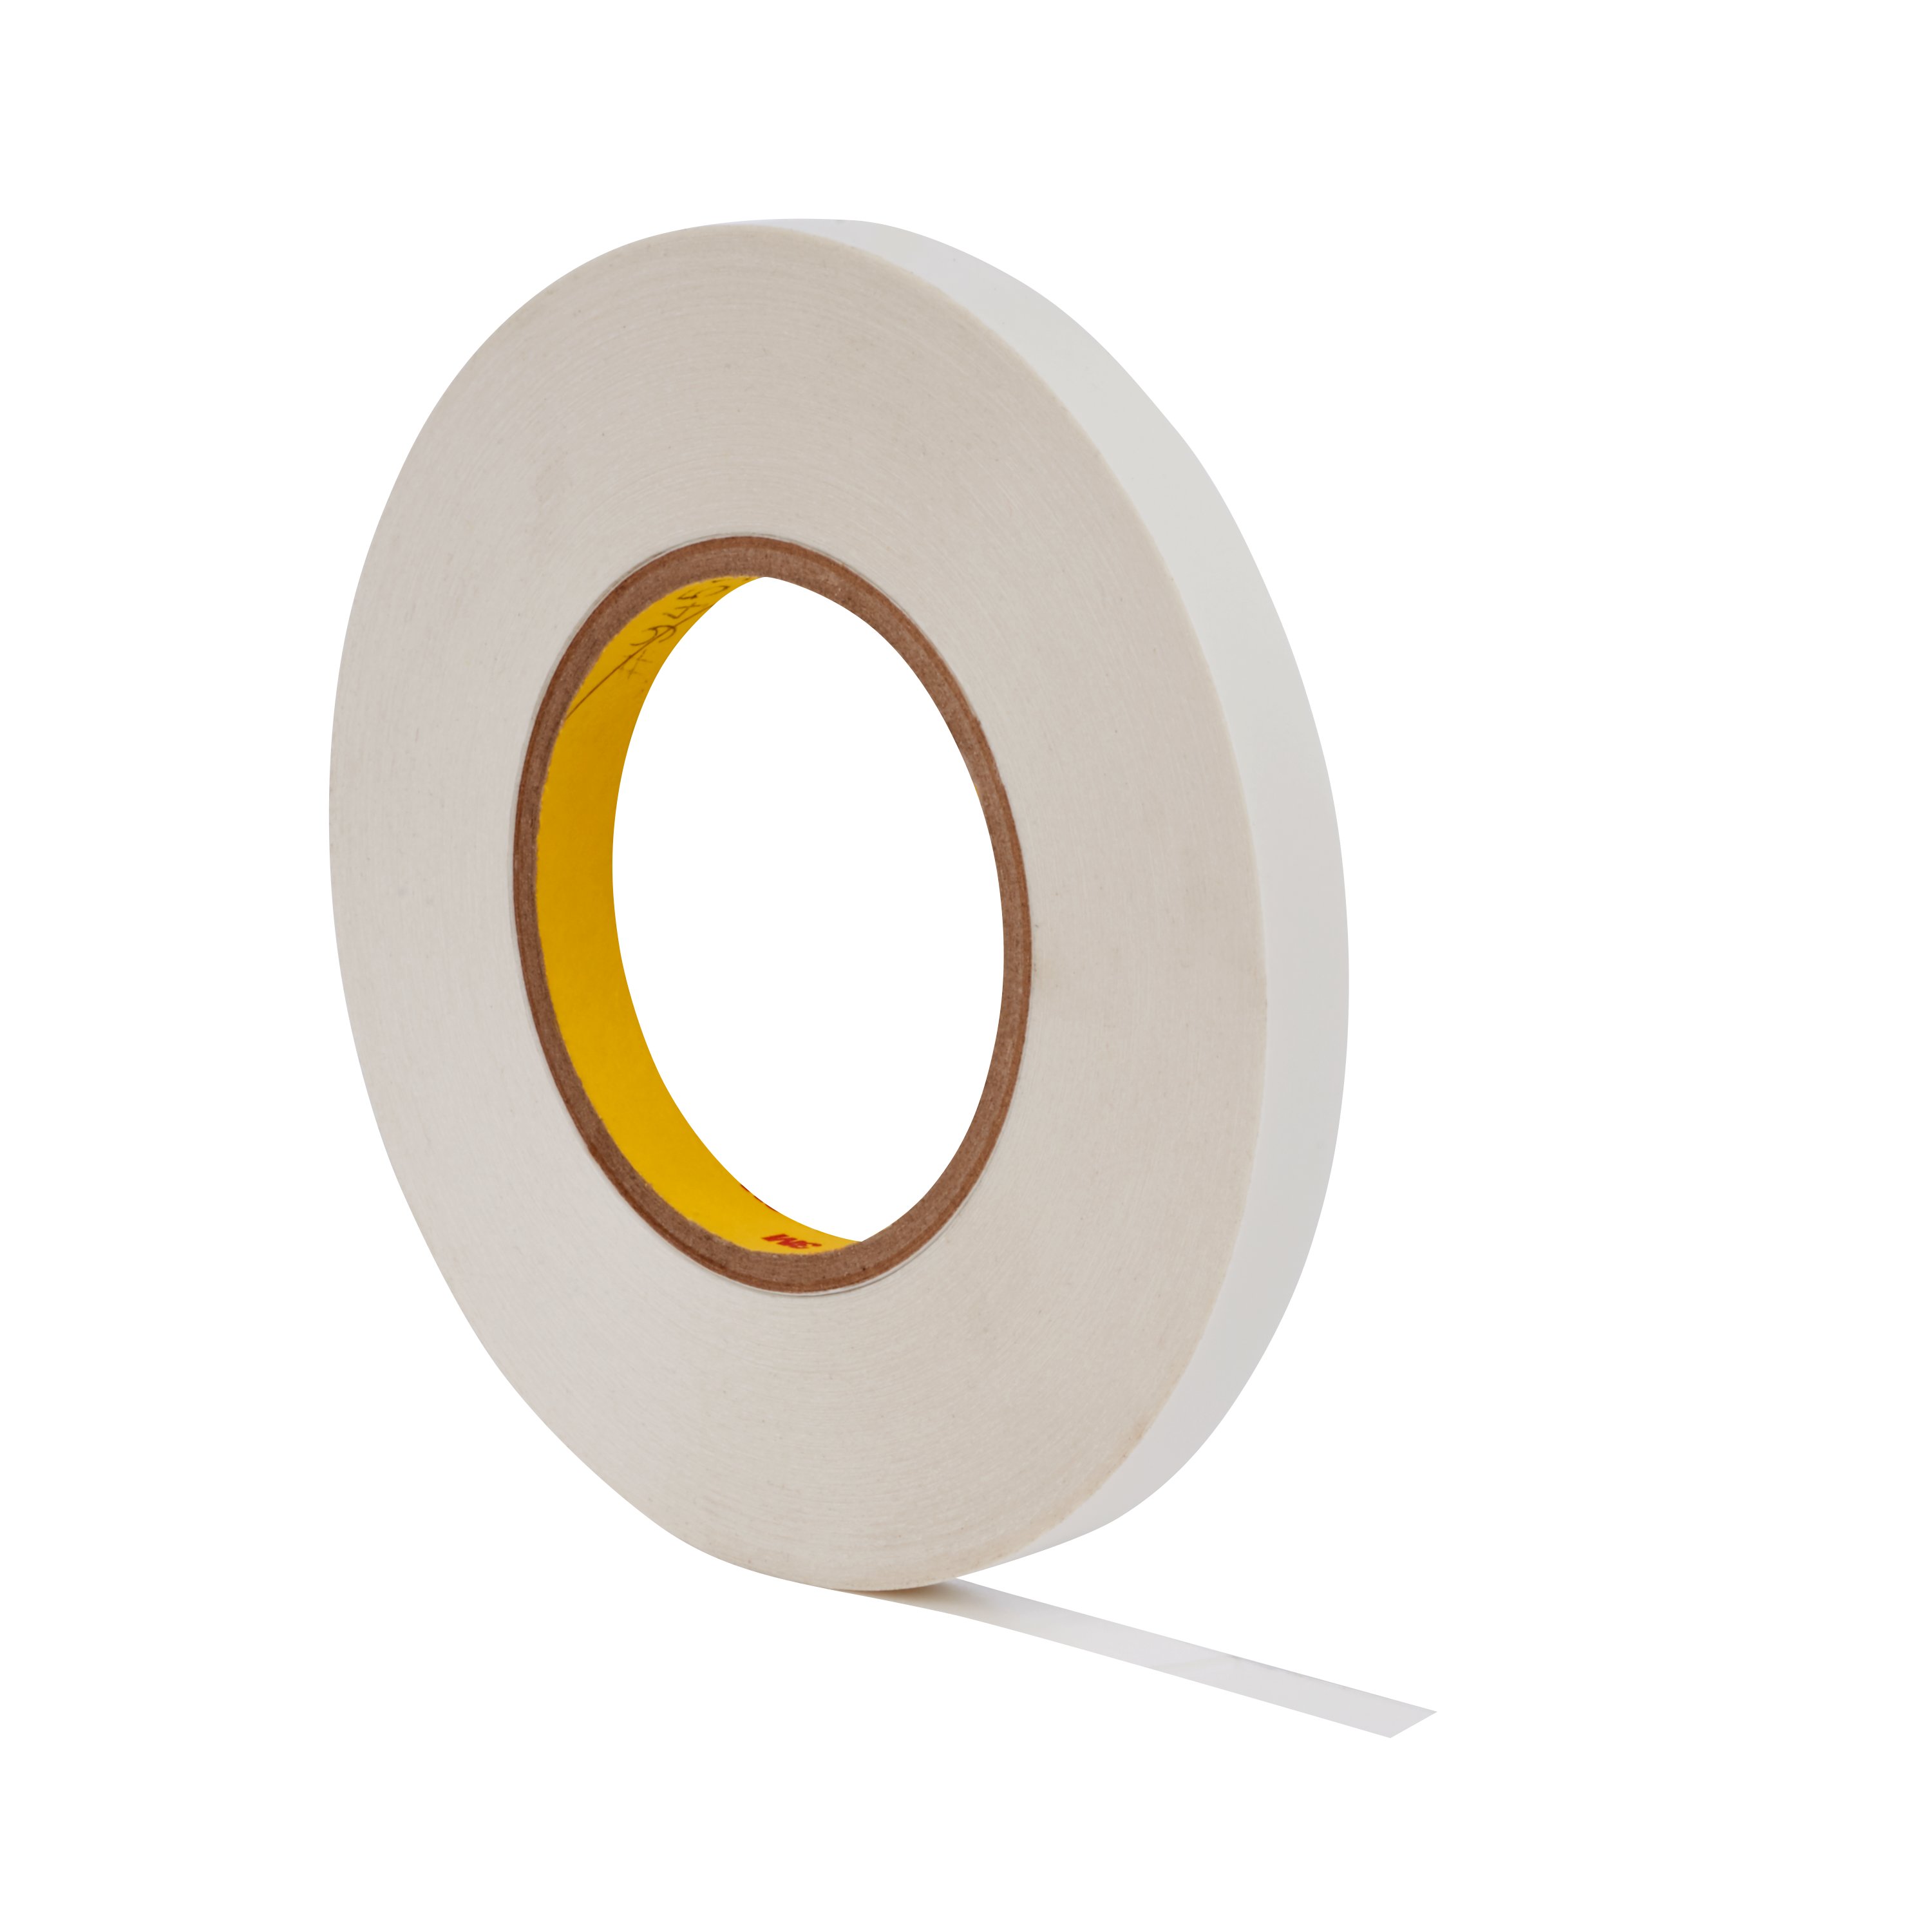 3M™ Removable Repositionable Double Coated Tape 9415PC is laid down using the permanent adhesive side, the tape is ready for applications where lightweight items need to be repositioned, or removed and replaced repeatedly.